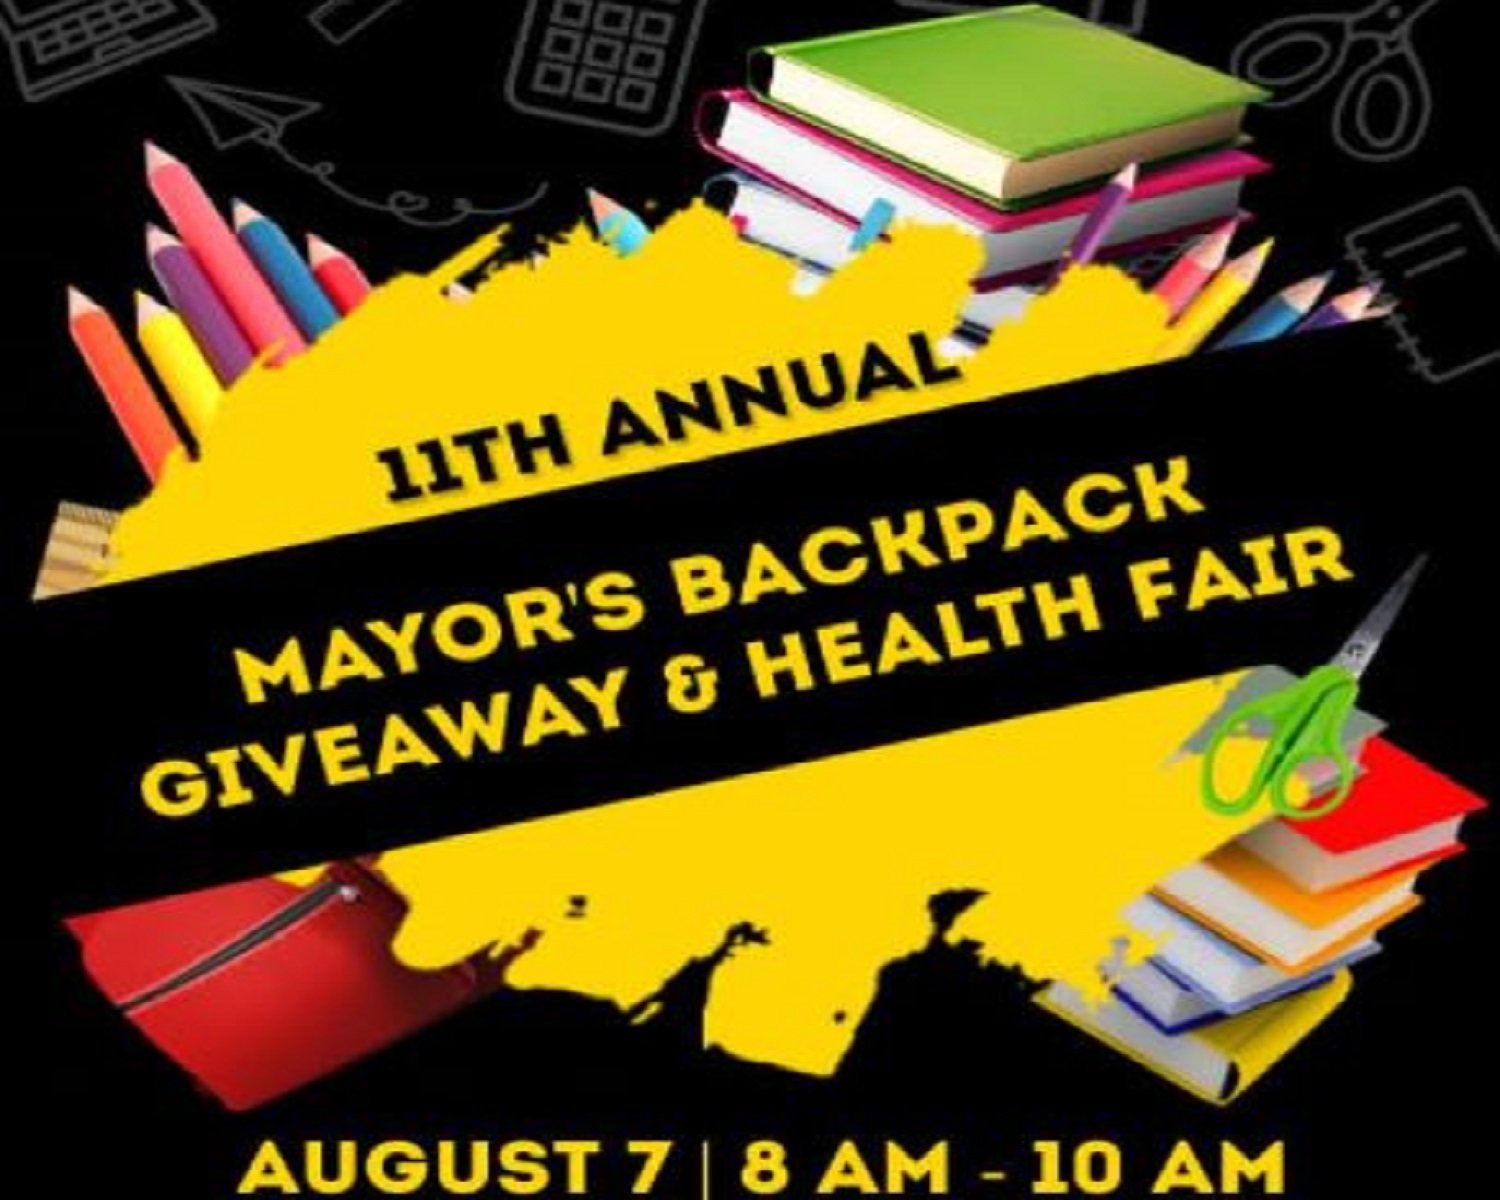 11th Annual Mayors Backpack Giveaway DeLand 2021